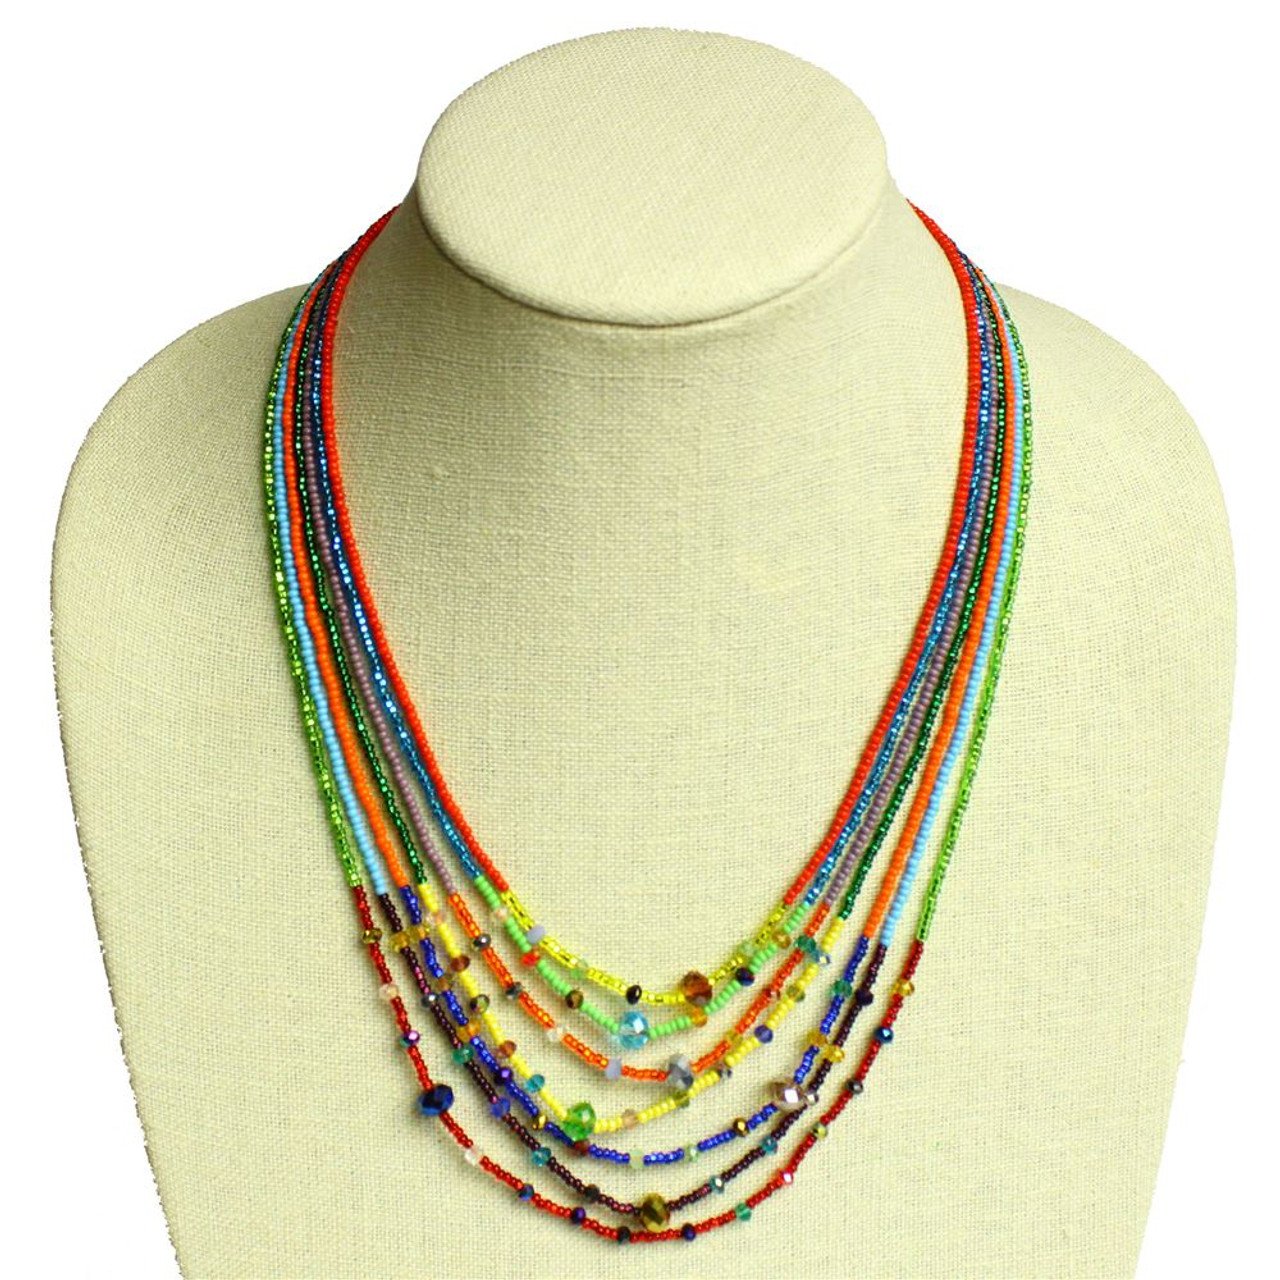 Multicolored Glass Beads Seven Strand with Crystals Necklace